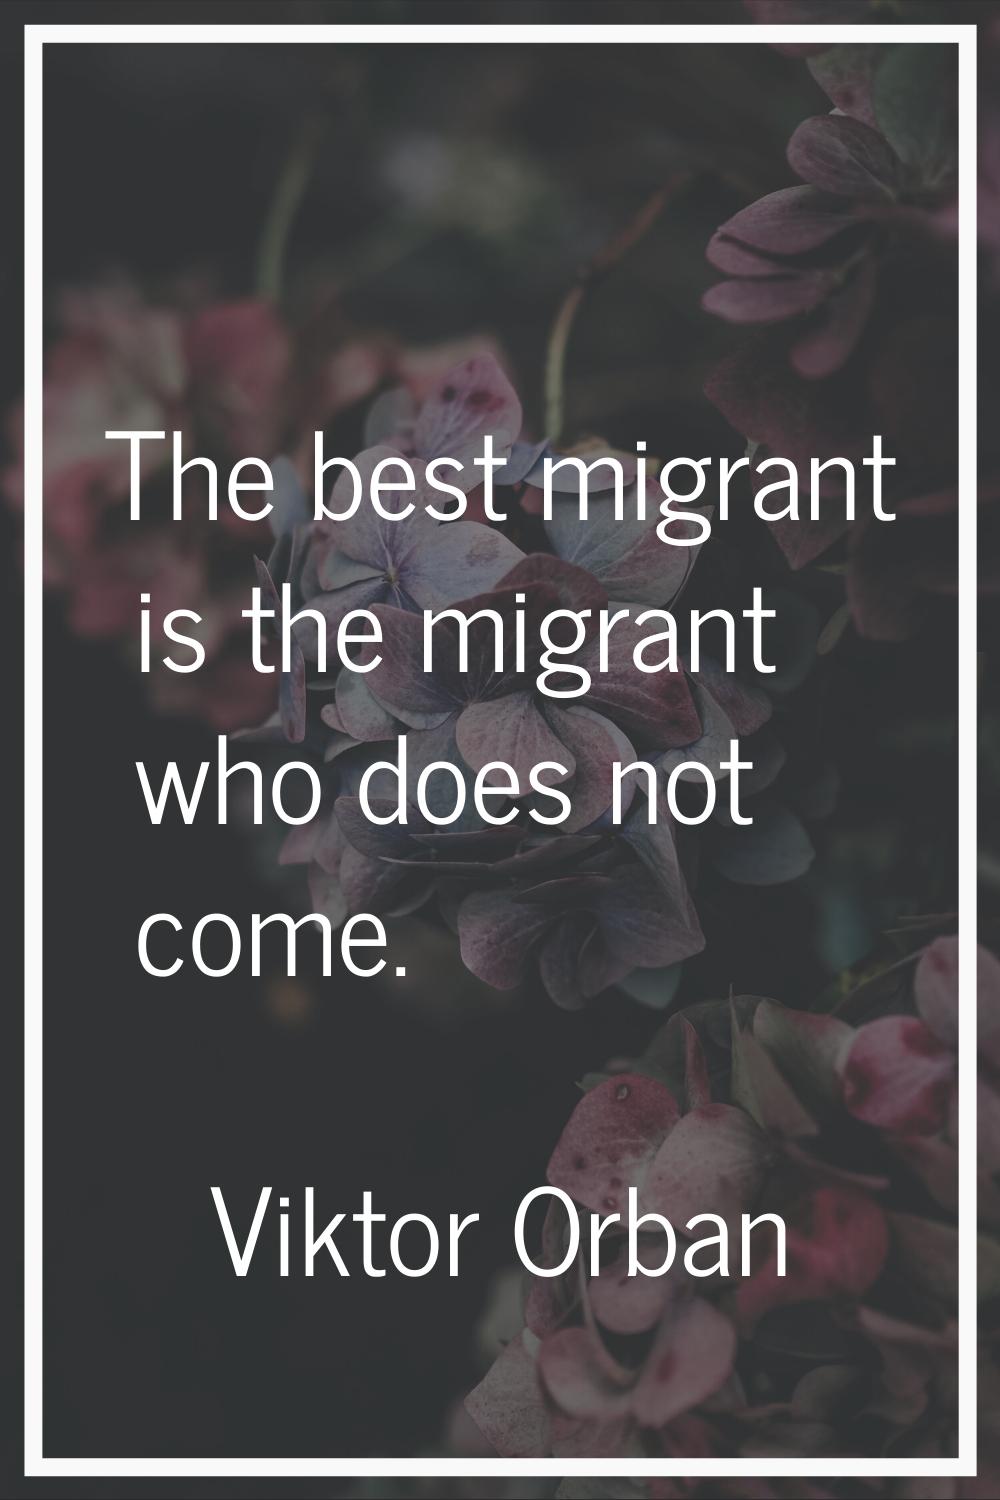 The best migrant is the migrant who does not come.